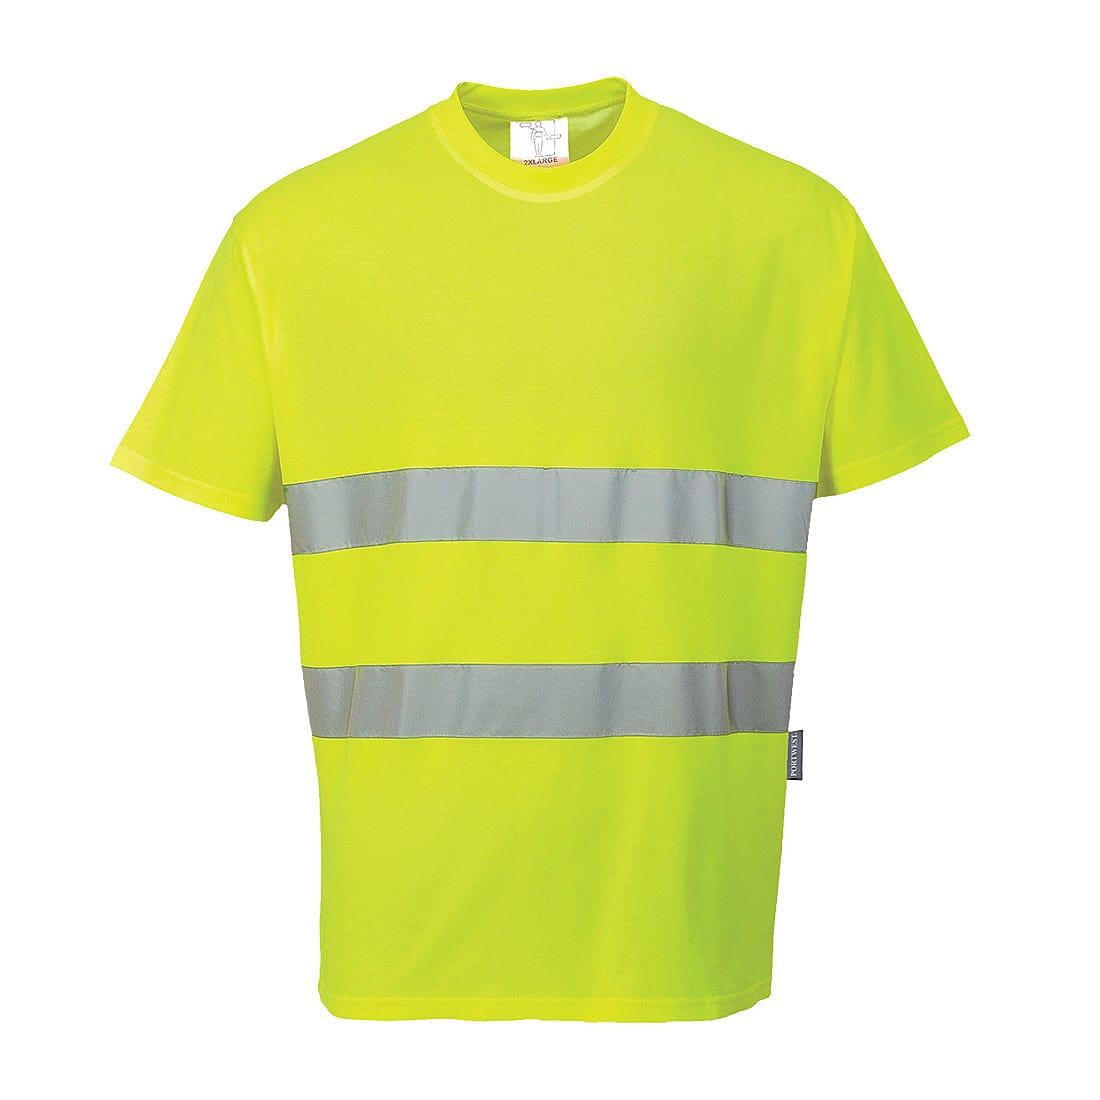 Portwest Cotton Comfort T-Shirt in Yellow (Product Code: S172)